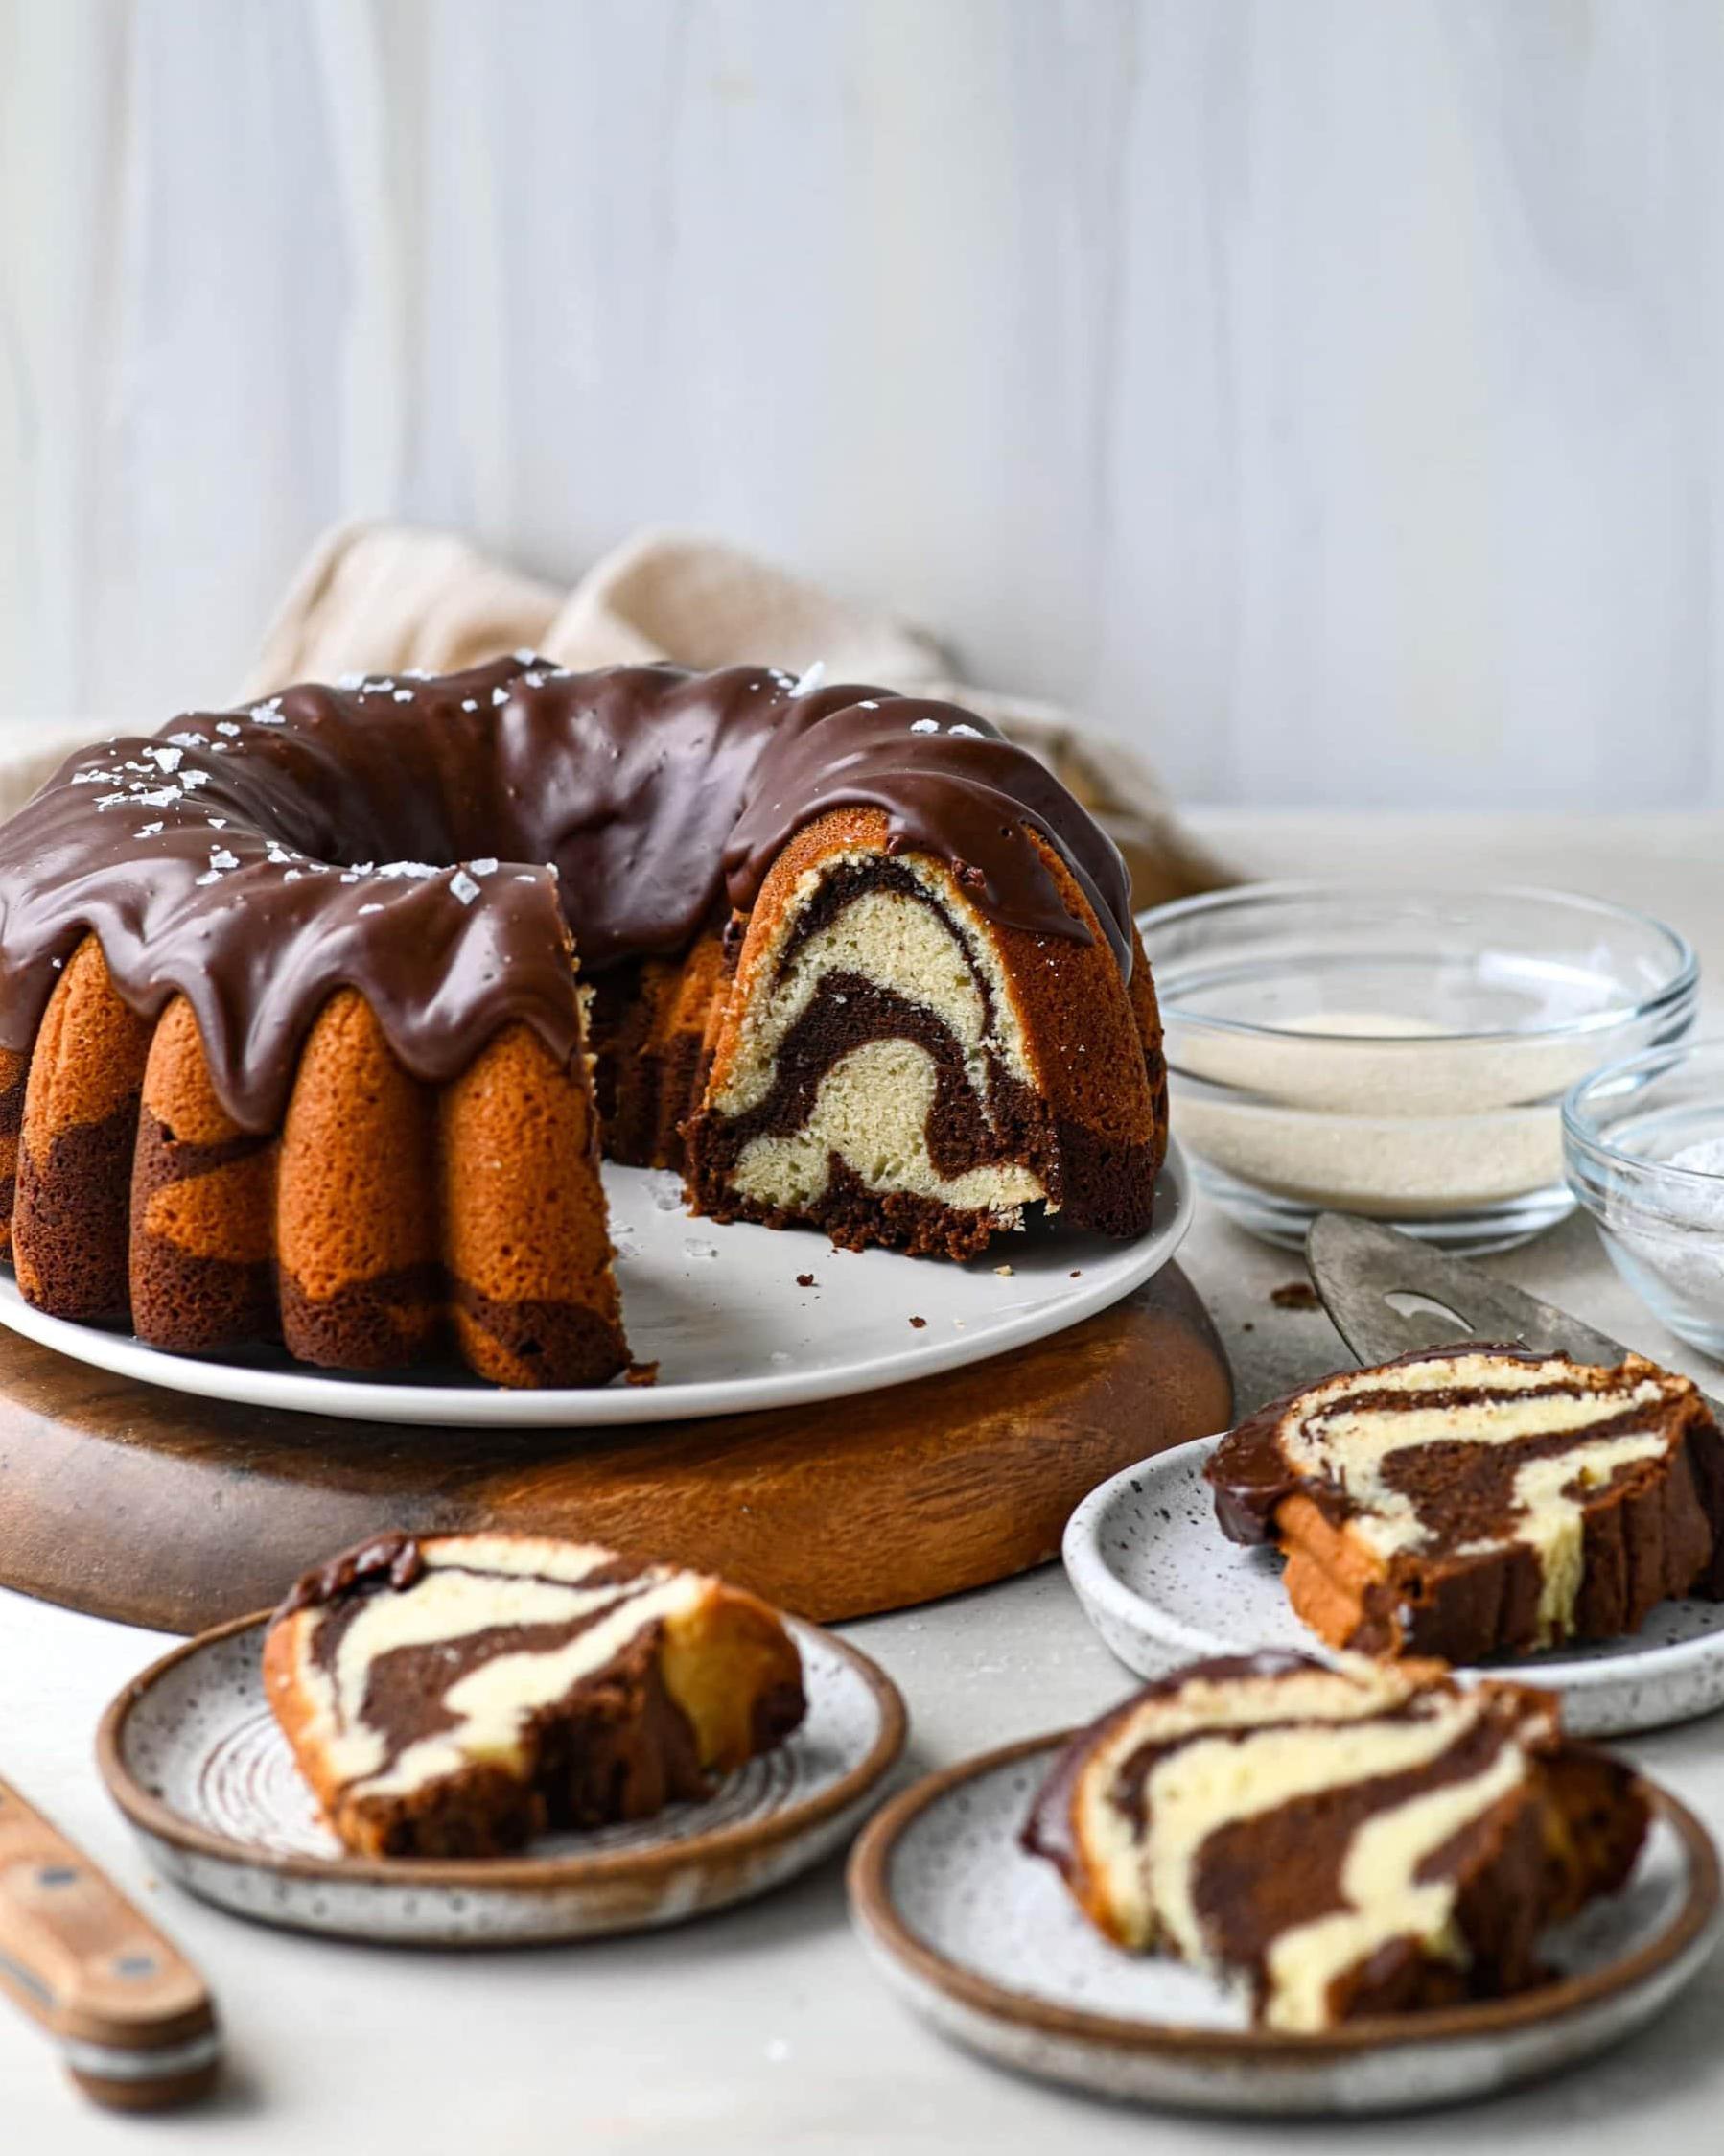  Satisfy your sweet tooth with this decadent chocolate swirl pound cake!